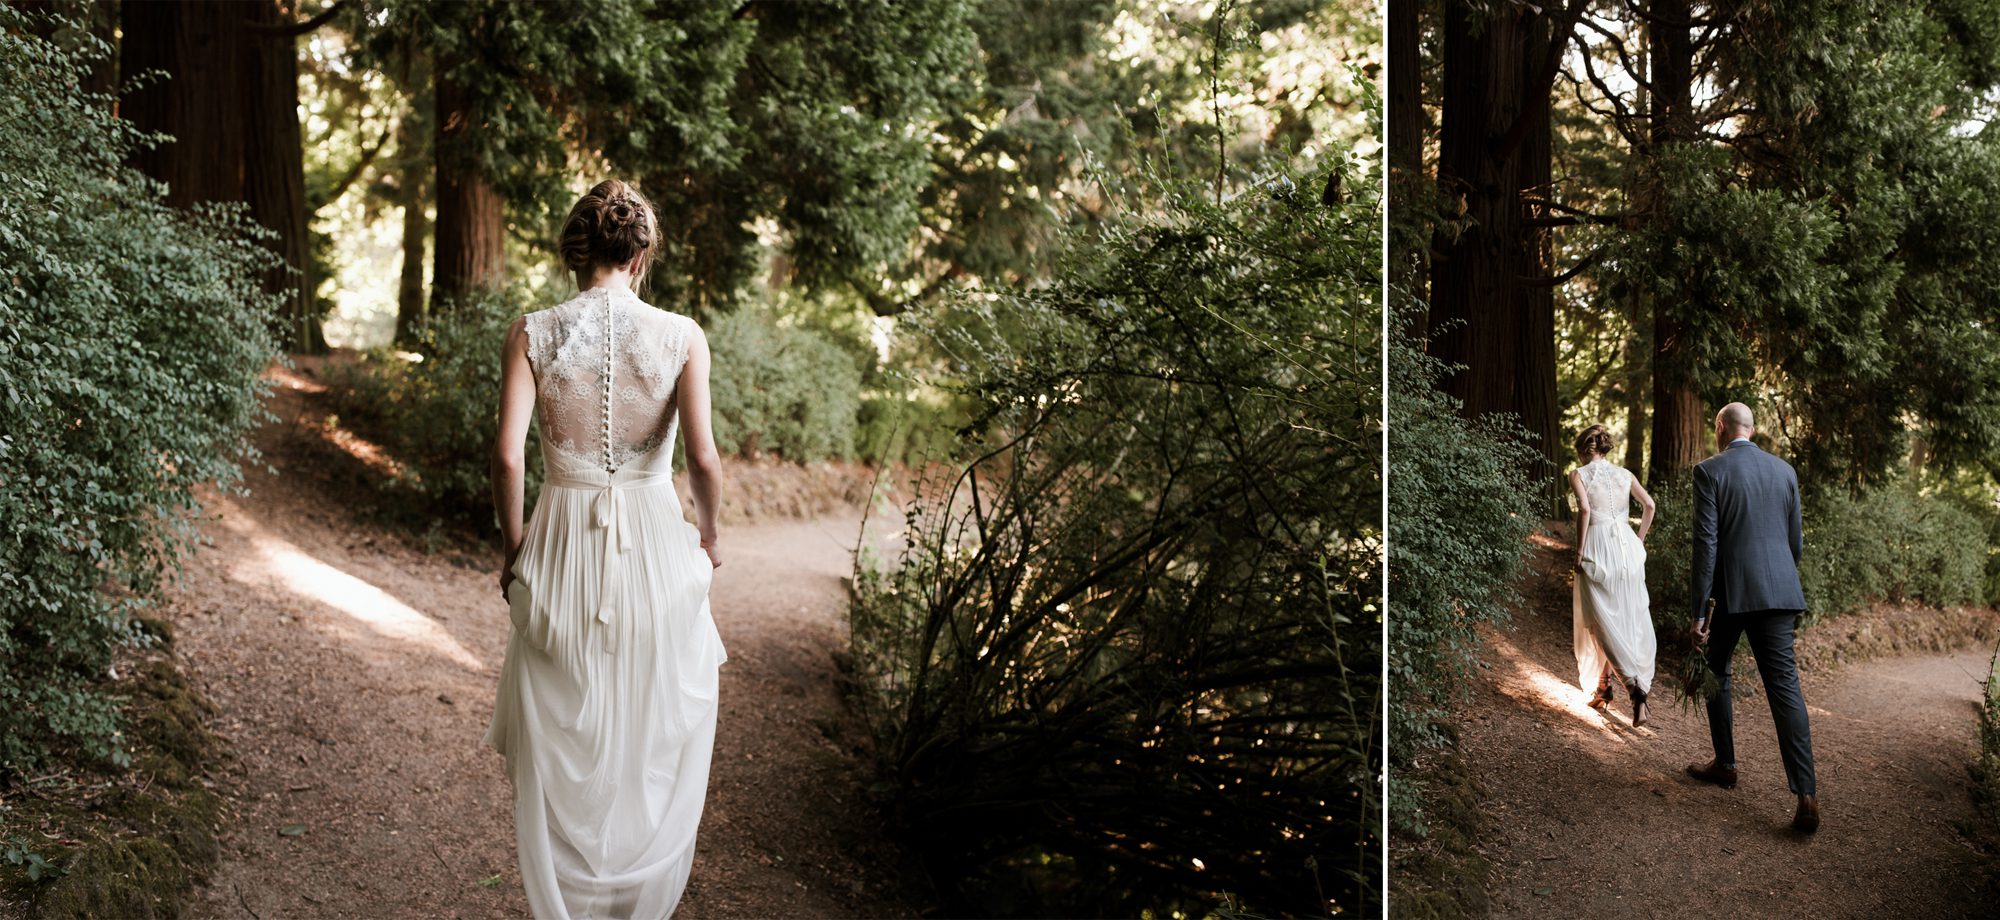 The bride and groom make their way out of Laurelhurst Park. By wedding photographer Briana Morrison